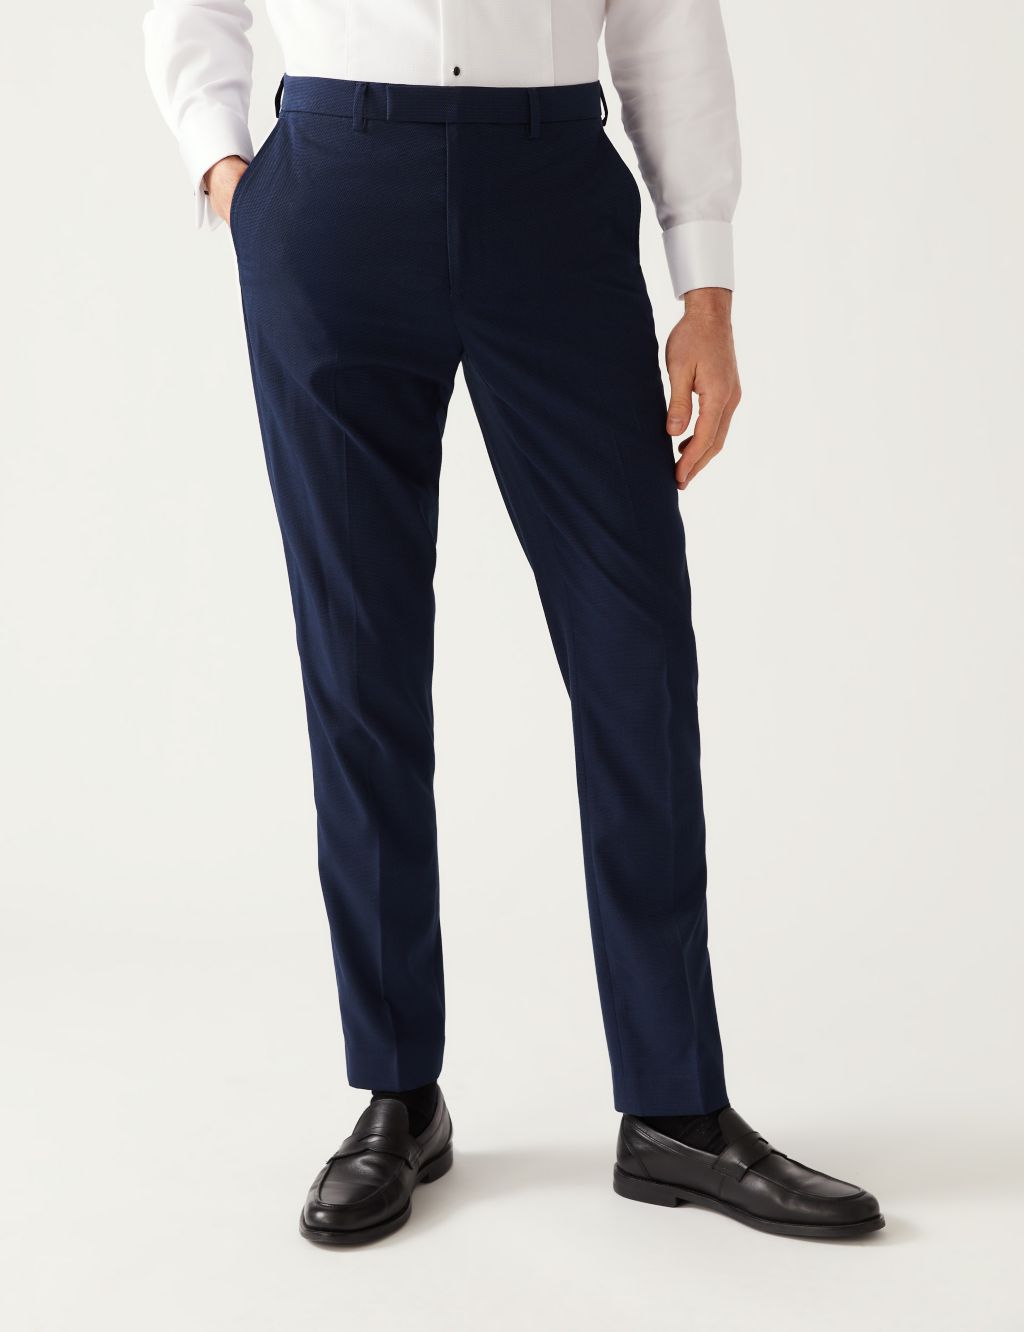 Navy Slim Fit Stretch Suit Trousers image 2